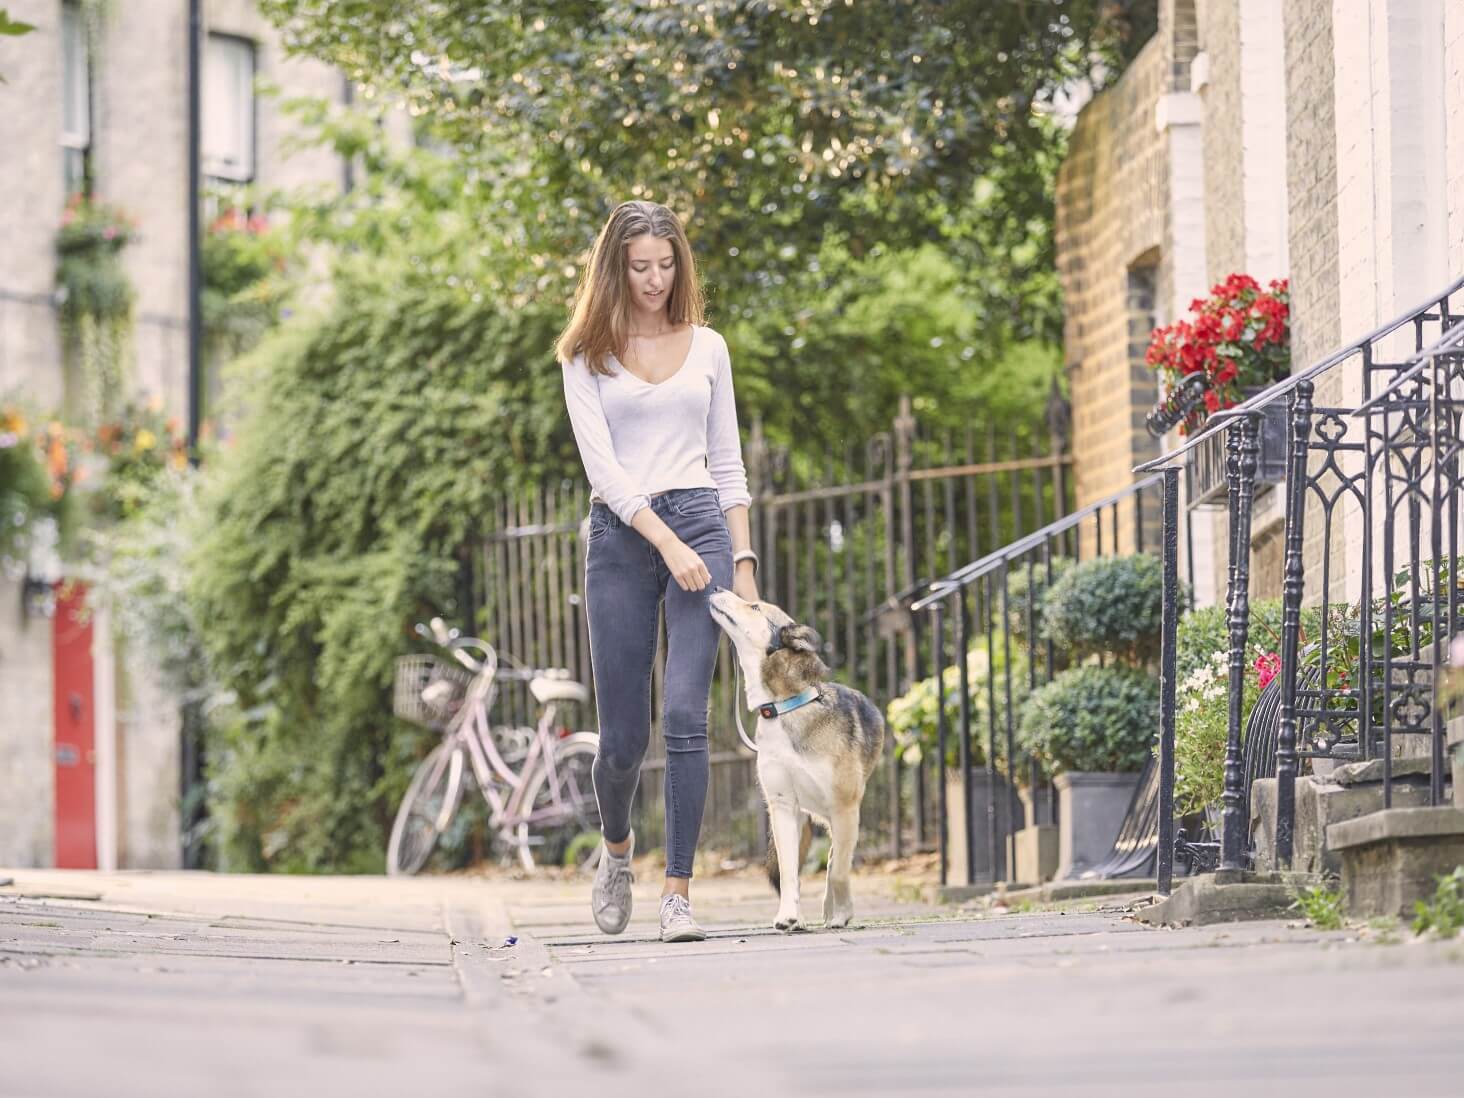 How to Find the Perfect Dog Walker